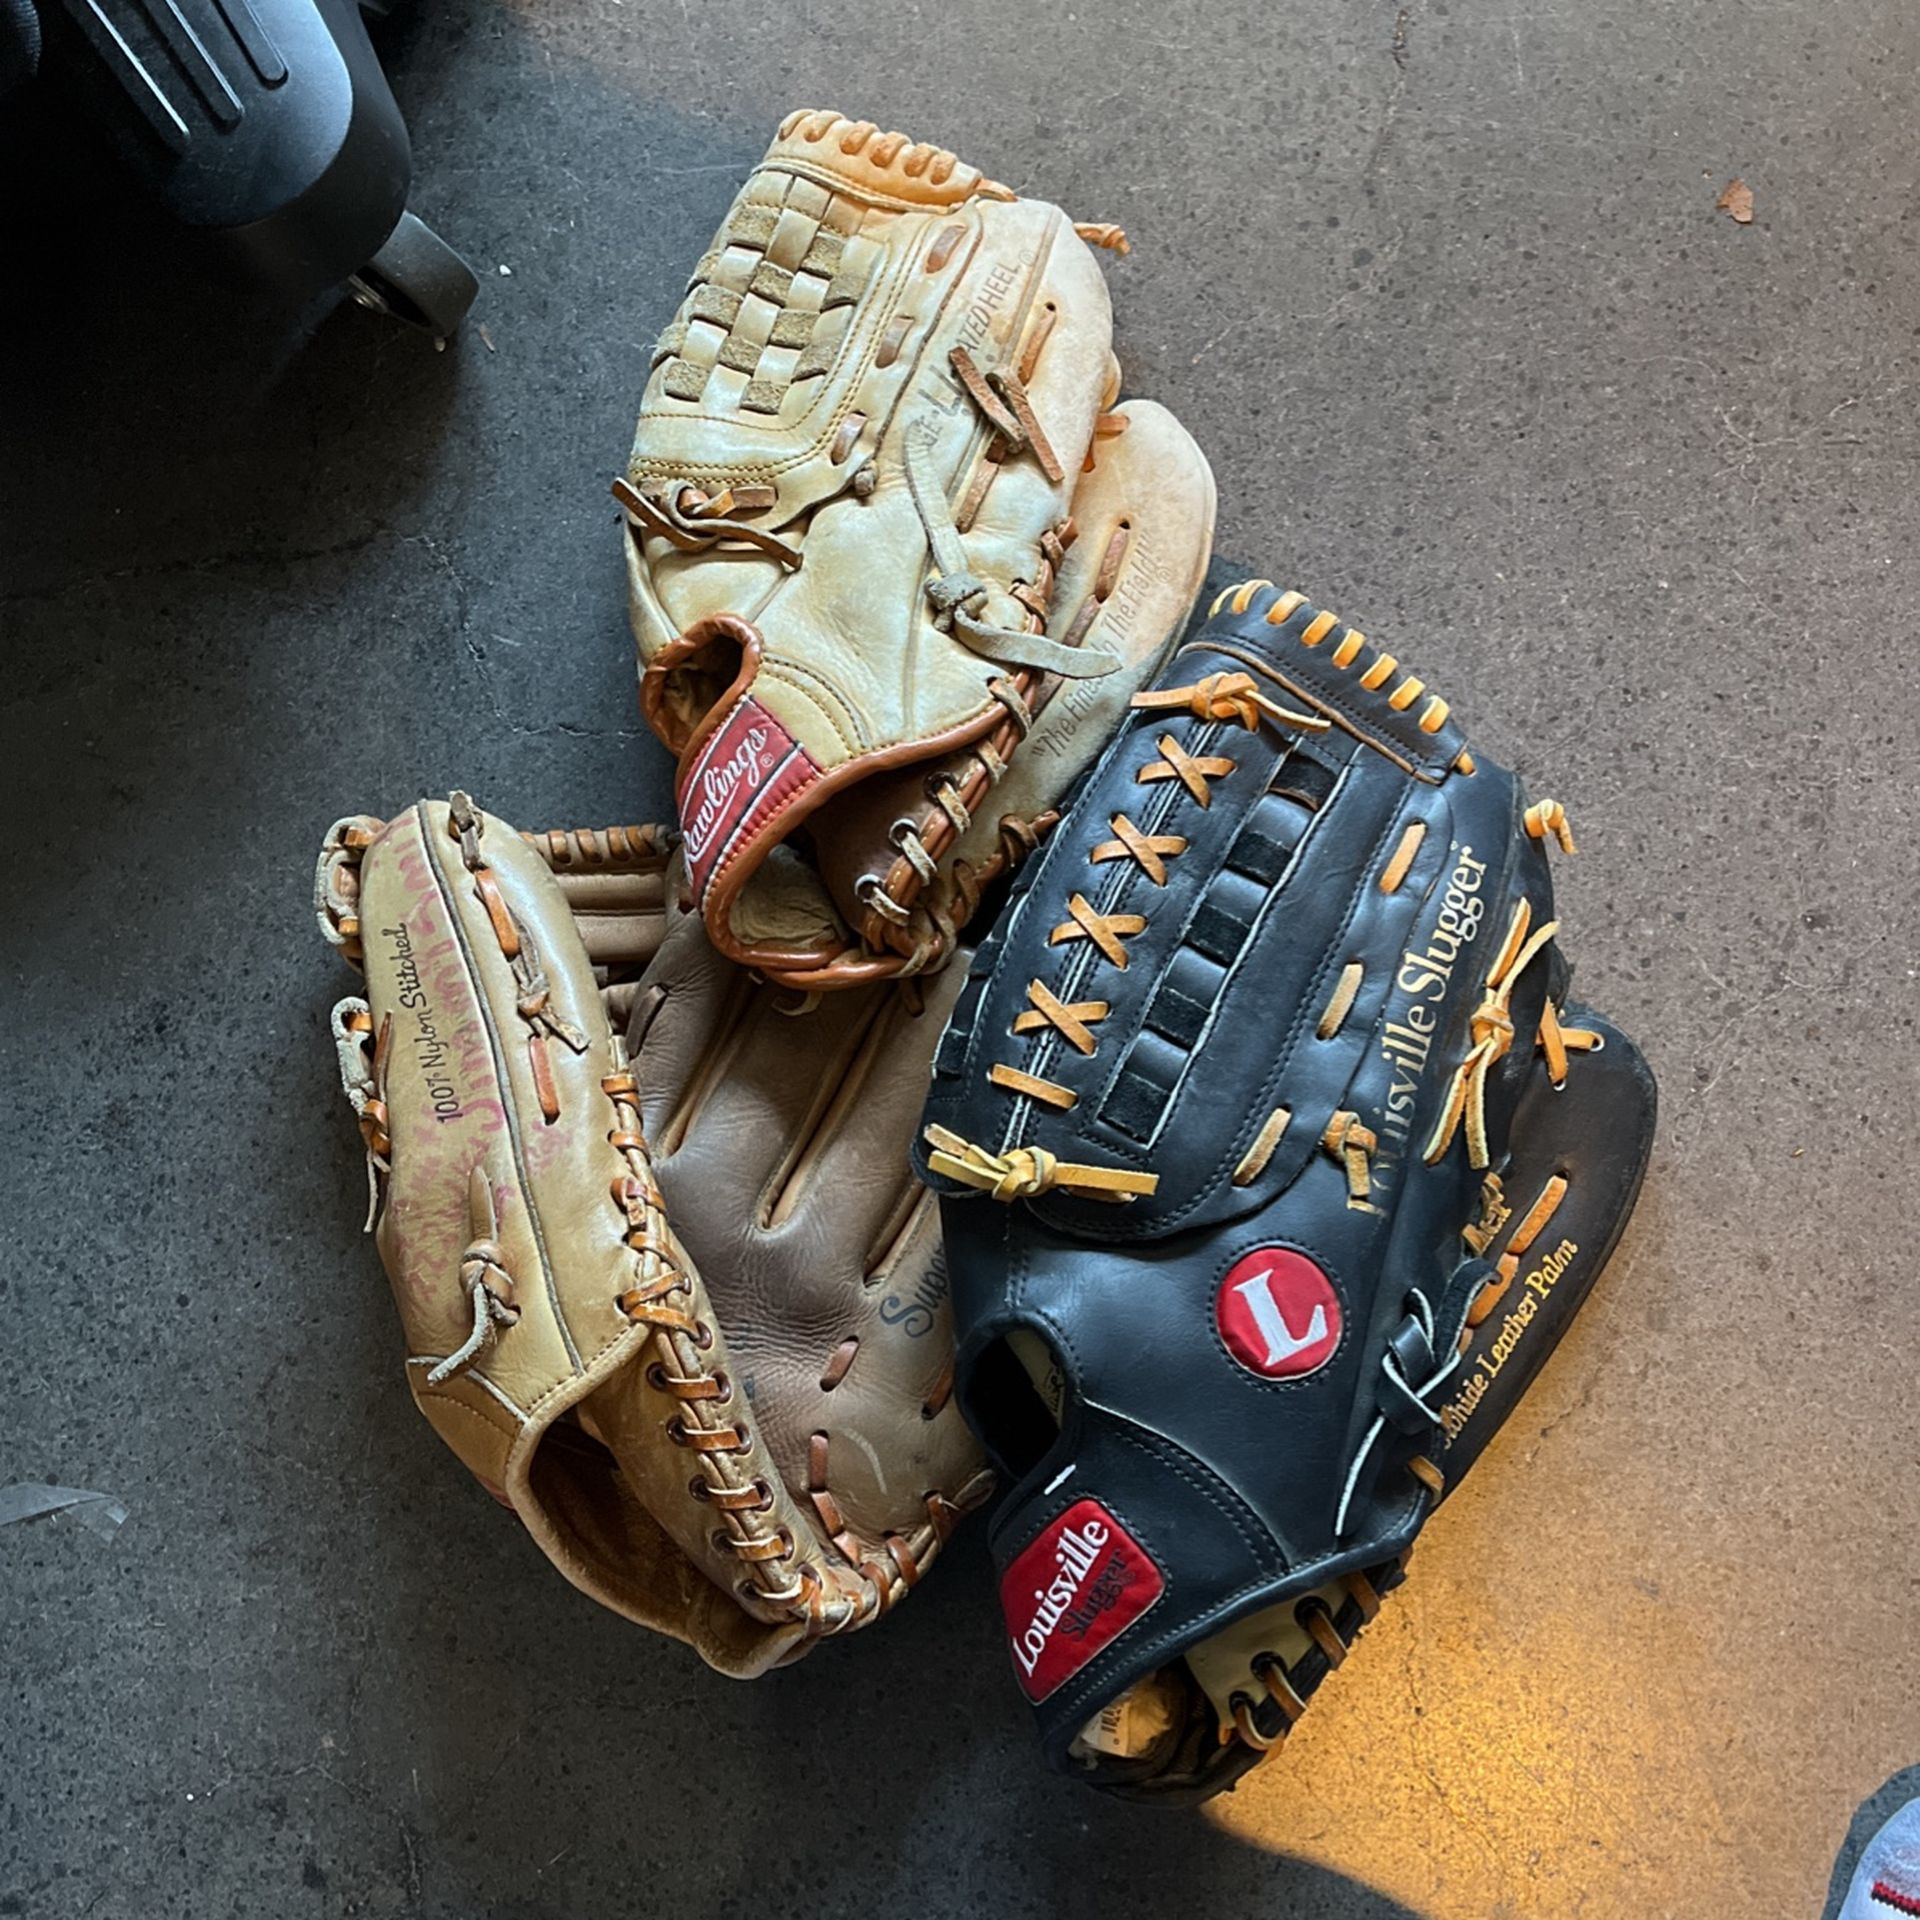 Baseball Gloves, Good Condition One Is A Vintage Glove